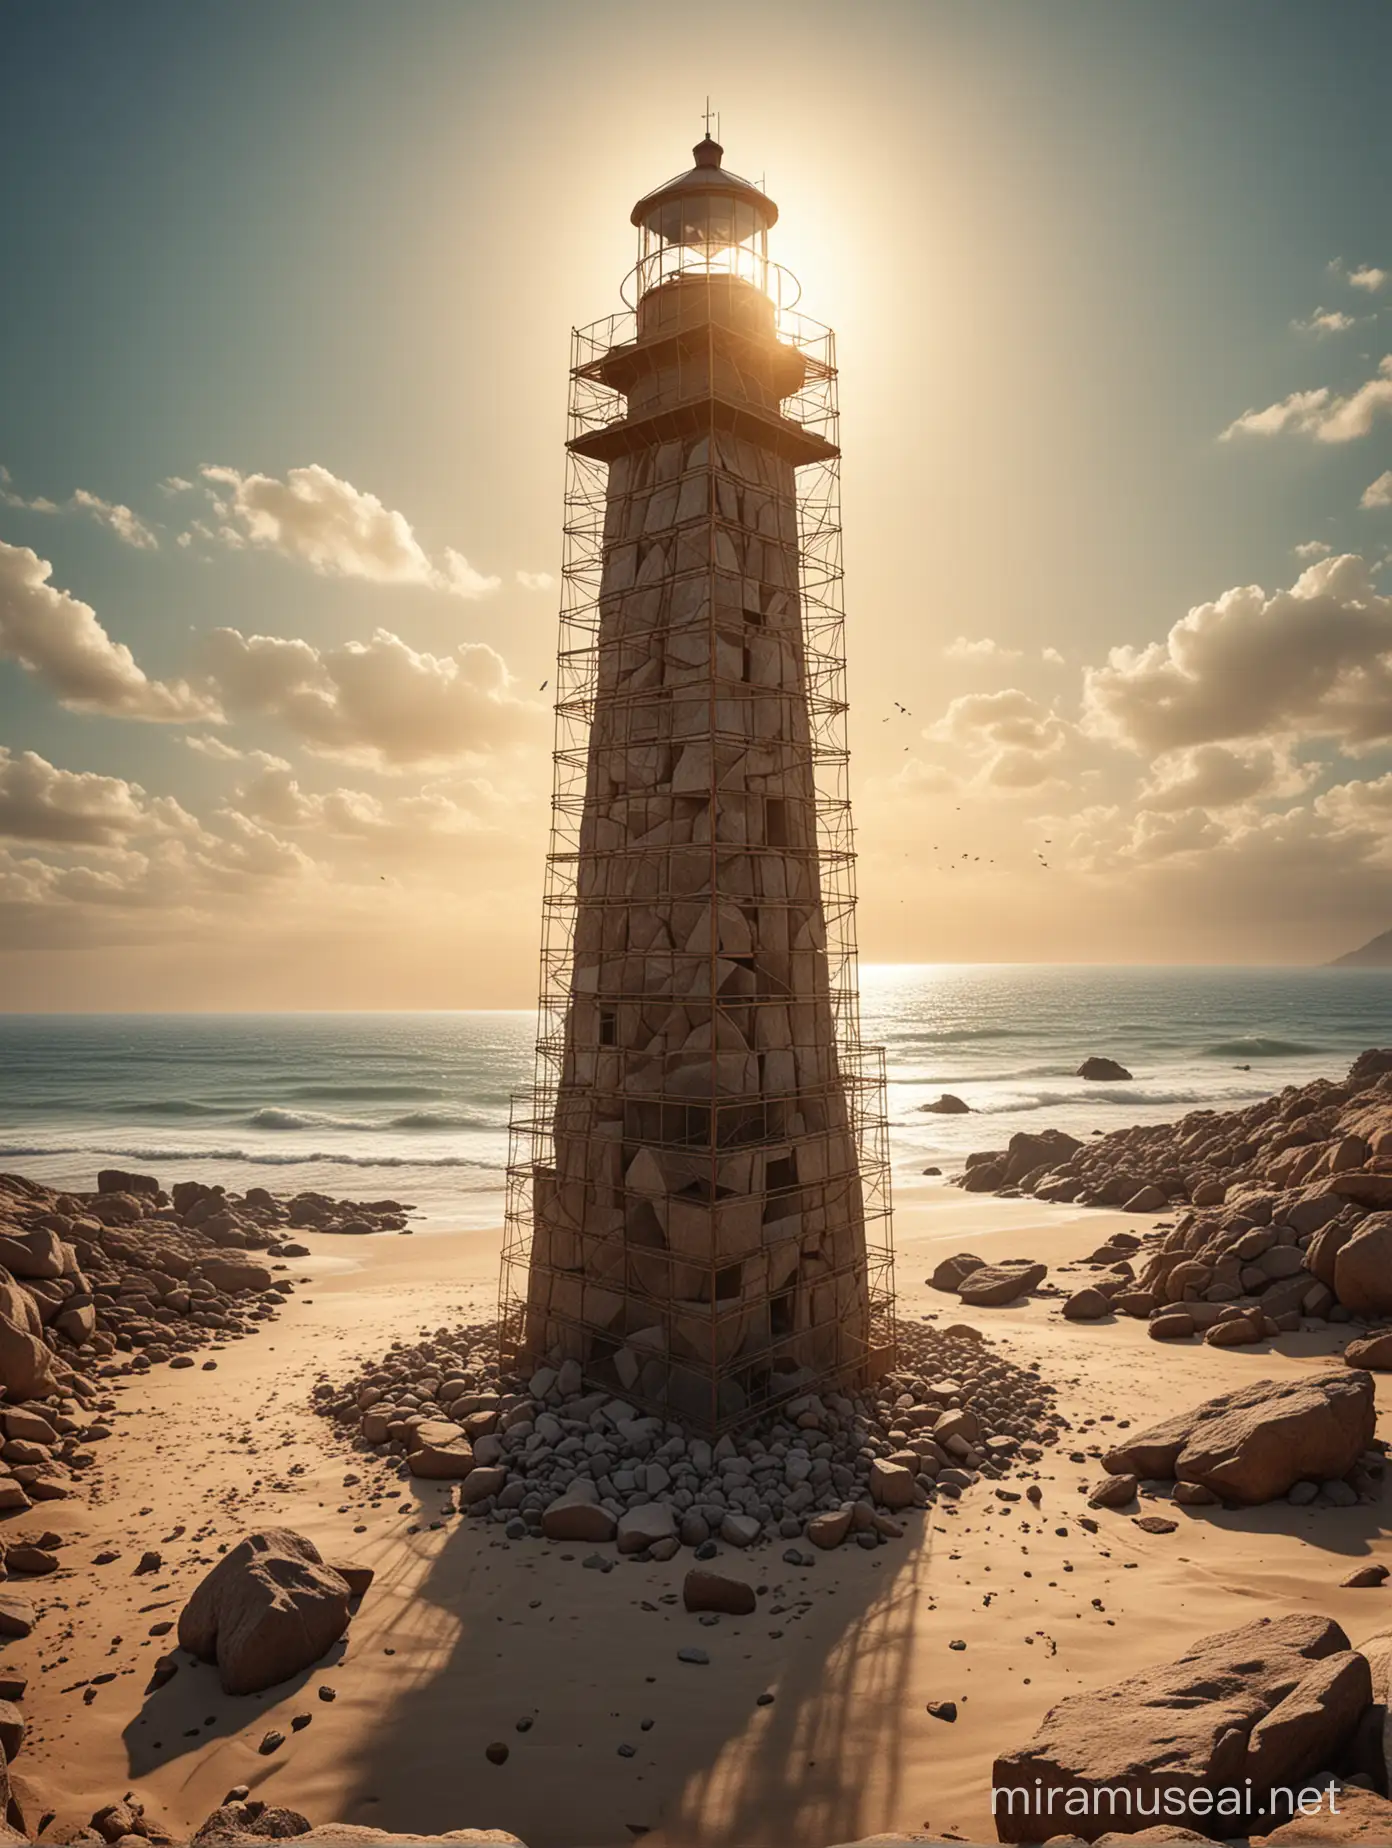 Create a captivating image three-quarter view, dynamic, of lighthouse wireframe structure composed of empty cubes with no walls, superimposed in many different layers. This structure rises like a three-story tower and is repeated several times, emerging from the desert of sand and rocks in front of the sea. The sunlight accentuates the outlines of the structure, creating a fascinating contrast between its geometric shape and the surrounding natural environment. The atmosphere in the sea is pleasant yet mysterious, with warm hues dominating the landscape. Add elements of mystery, such as the sunset light filtering through the empty spaces of the cubic structure, suggesting a sense of wonder and uncertainty. This lighthouse should blend harmoniously with the sea environment, an otherwise wild and desolate panorama. Incorporate realistic and captivating details to create an image that captures the viewer's imagination and transports them into a world of mystery and beauty.